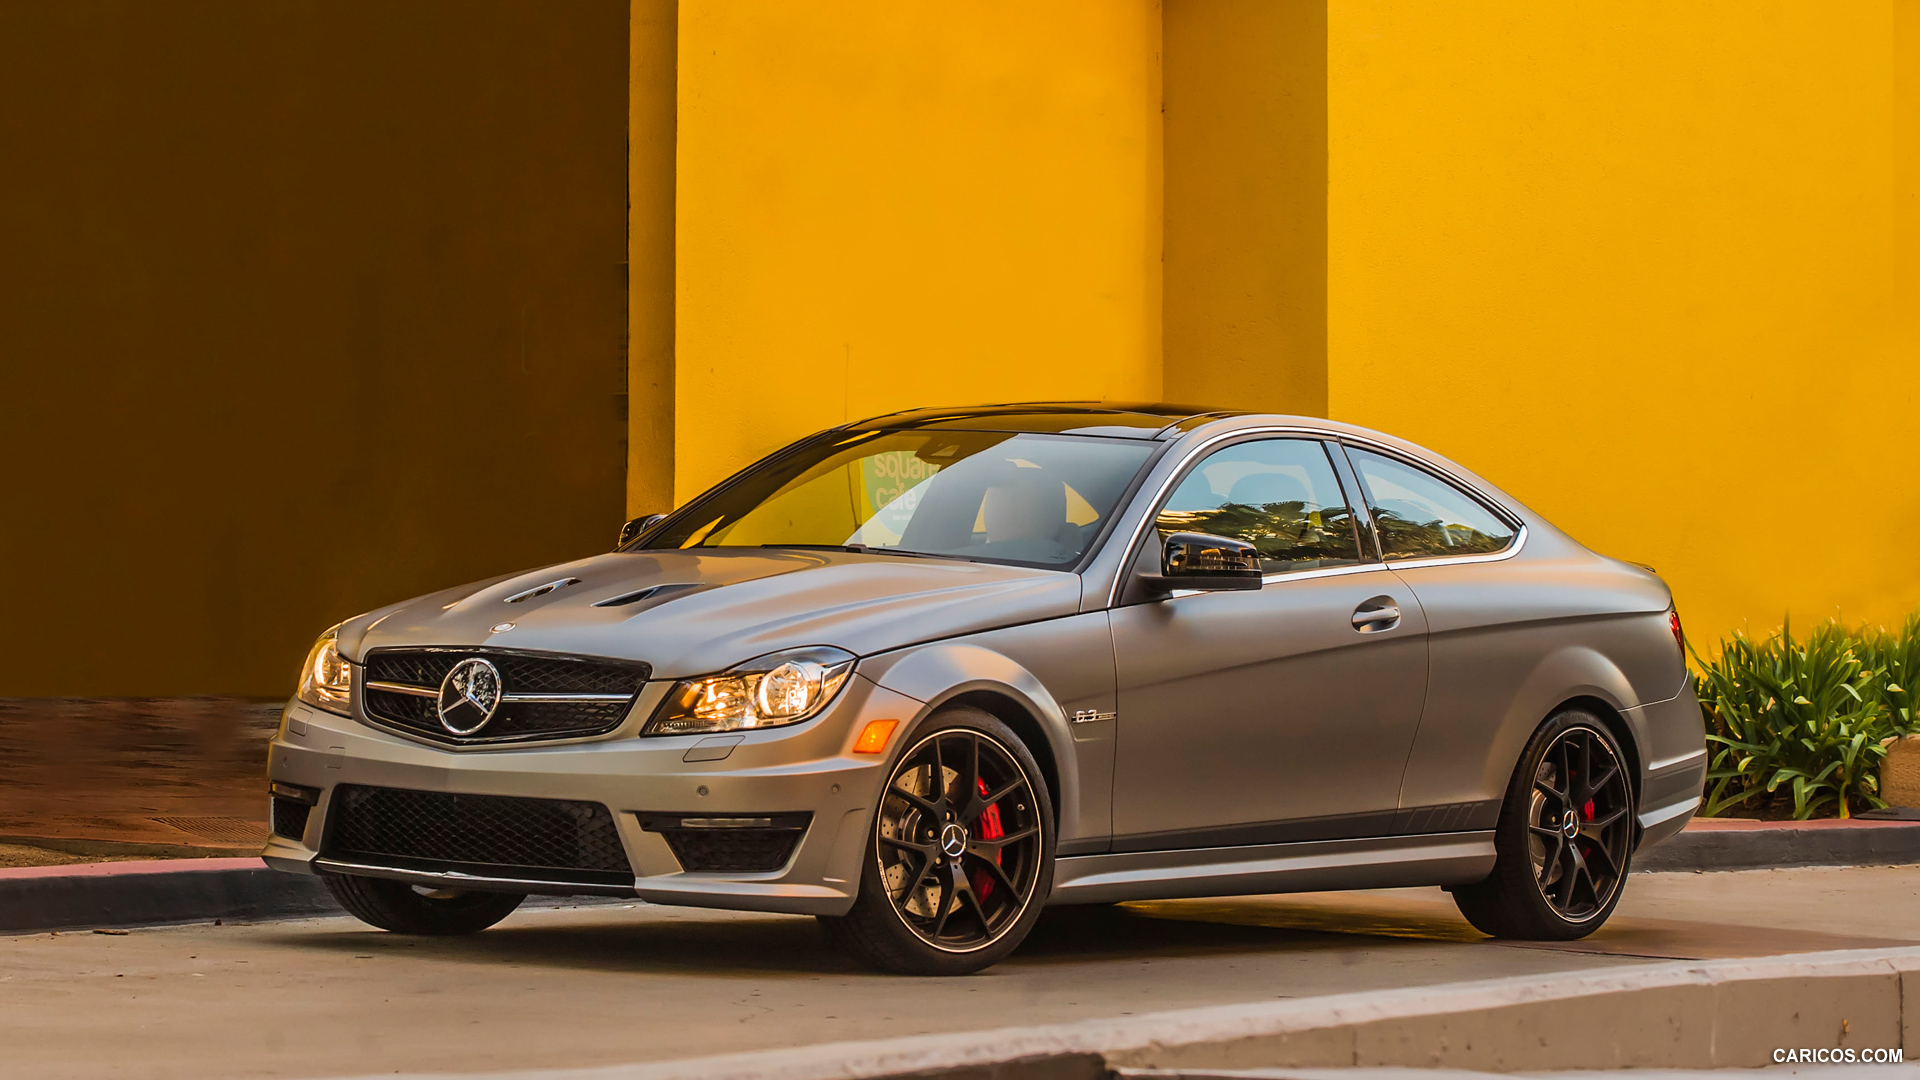 2014 Mercedes-Benz C 63 AMG Edition 507 Coupe (US Version)  - Front, #6 of 14